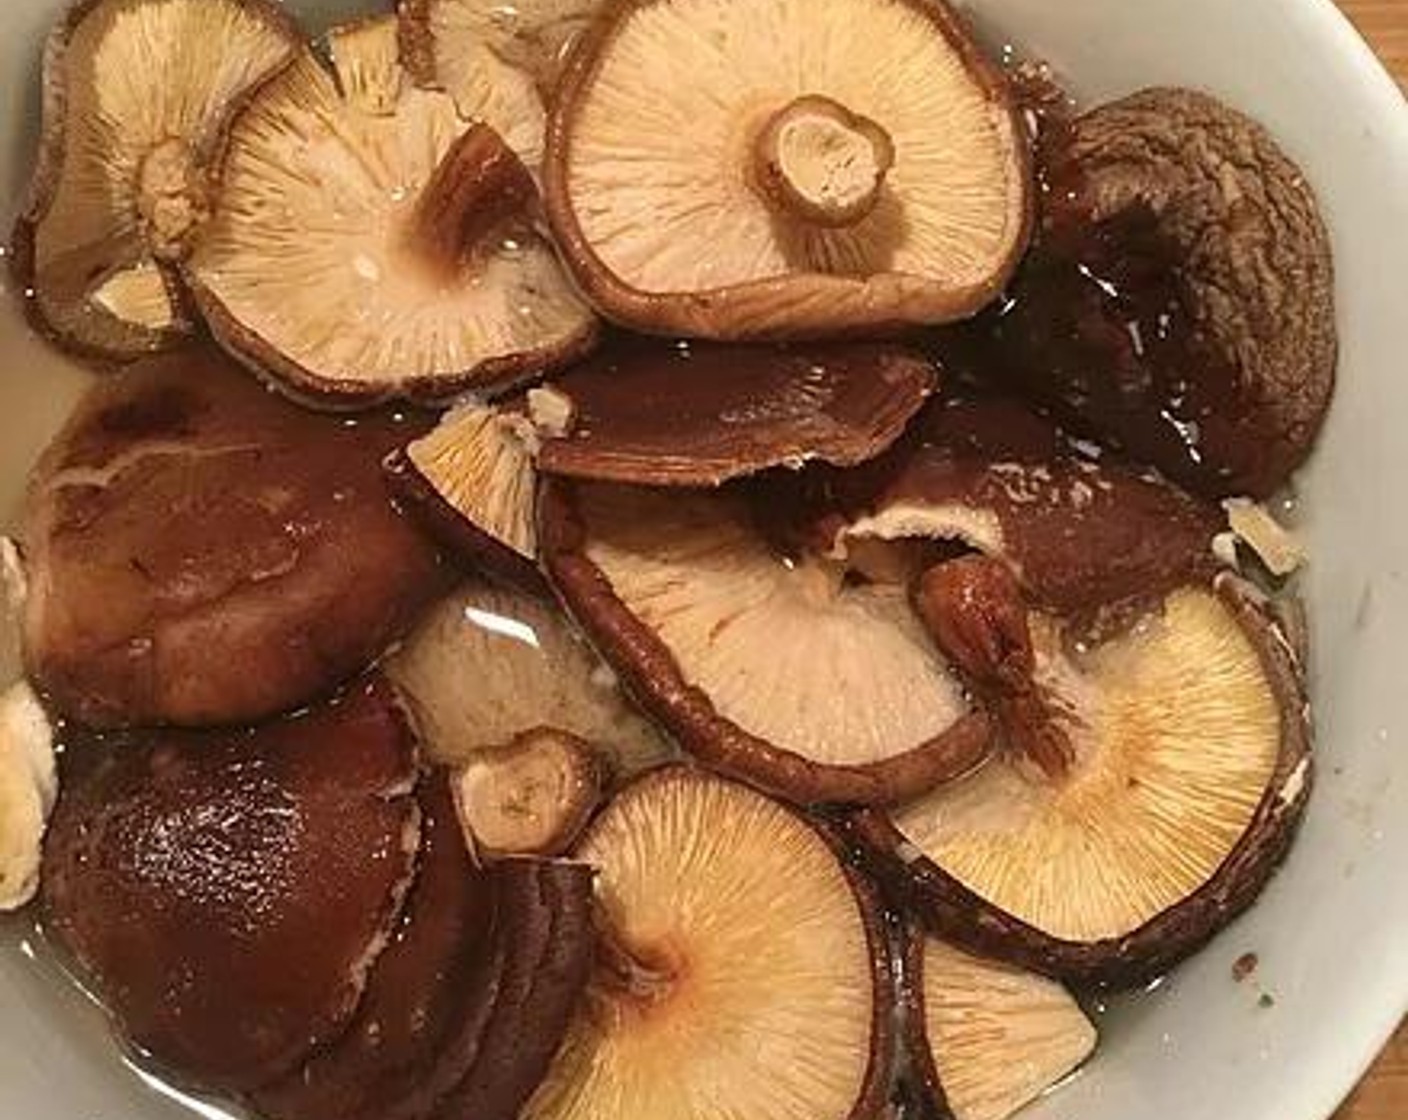 step 3 Place the Dried Shiitake Mushrooms (10) in a bowl and cover with water.  Let it soak for 30 minutes to rehydrate.  Once hydrated, the mushrooms will feel soft.  Squeeze out the excess moisture and thinly slice into strips.